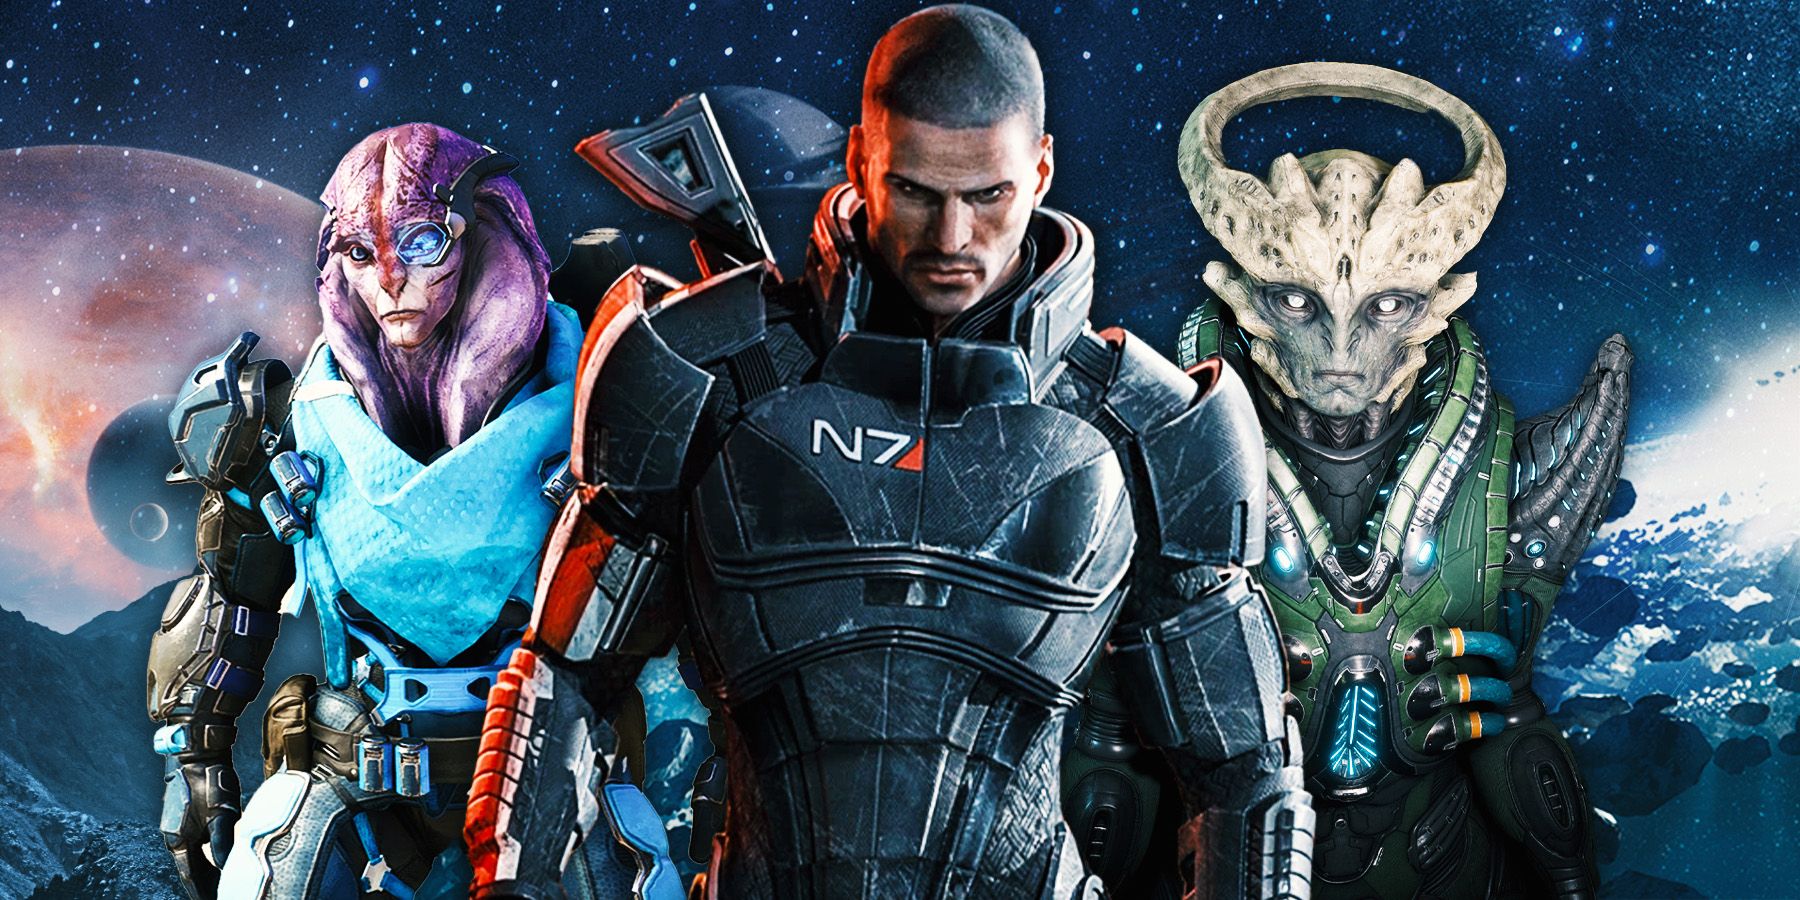 Commander Shepard from Mass Effect with Andromeda's two New Alien Races